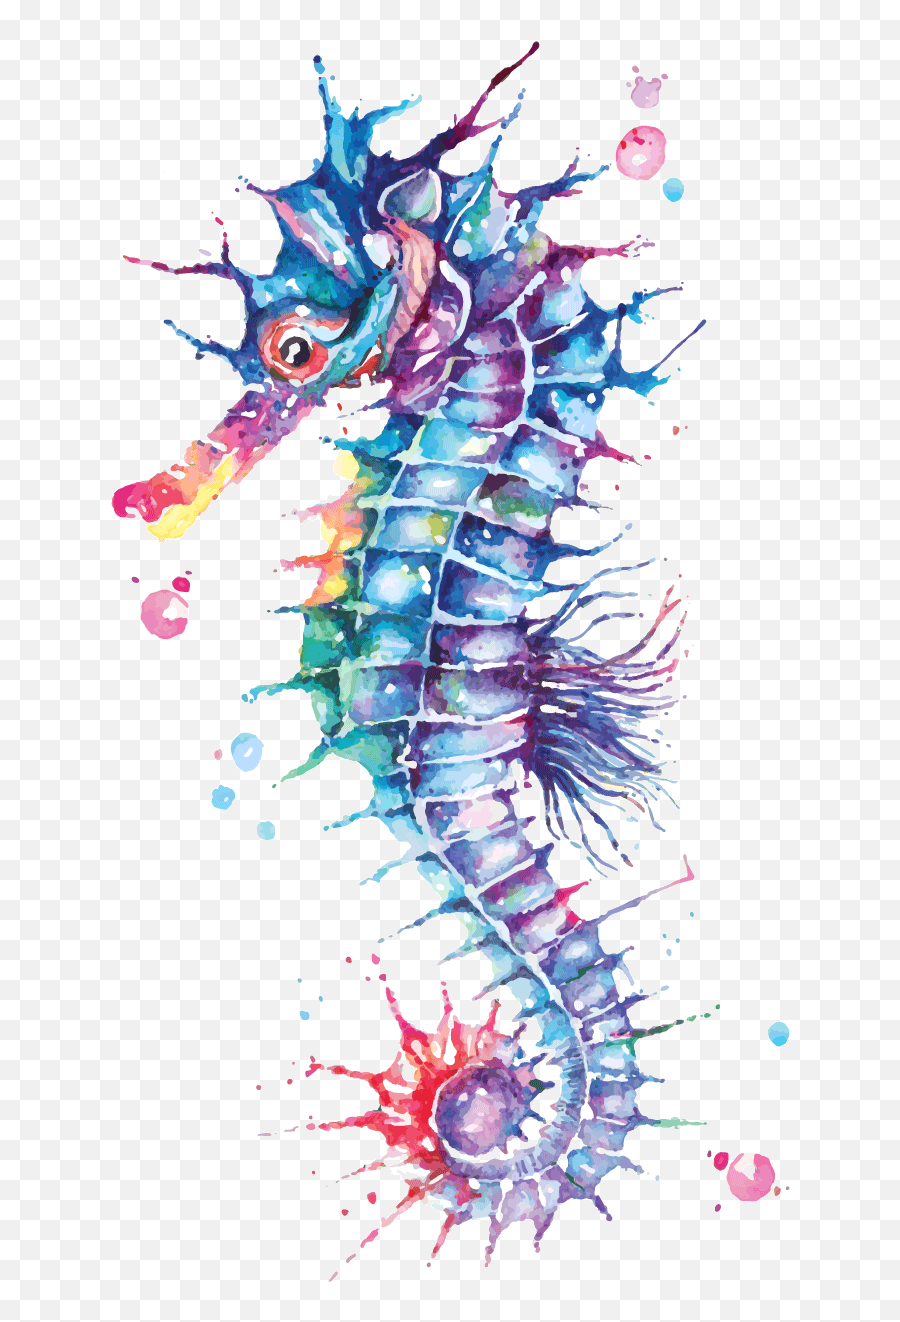 Seahorse Painted With Watercolor - Download Free Vectors Watercolor Seahorse Painting Png,Sea Horse Png